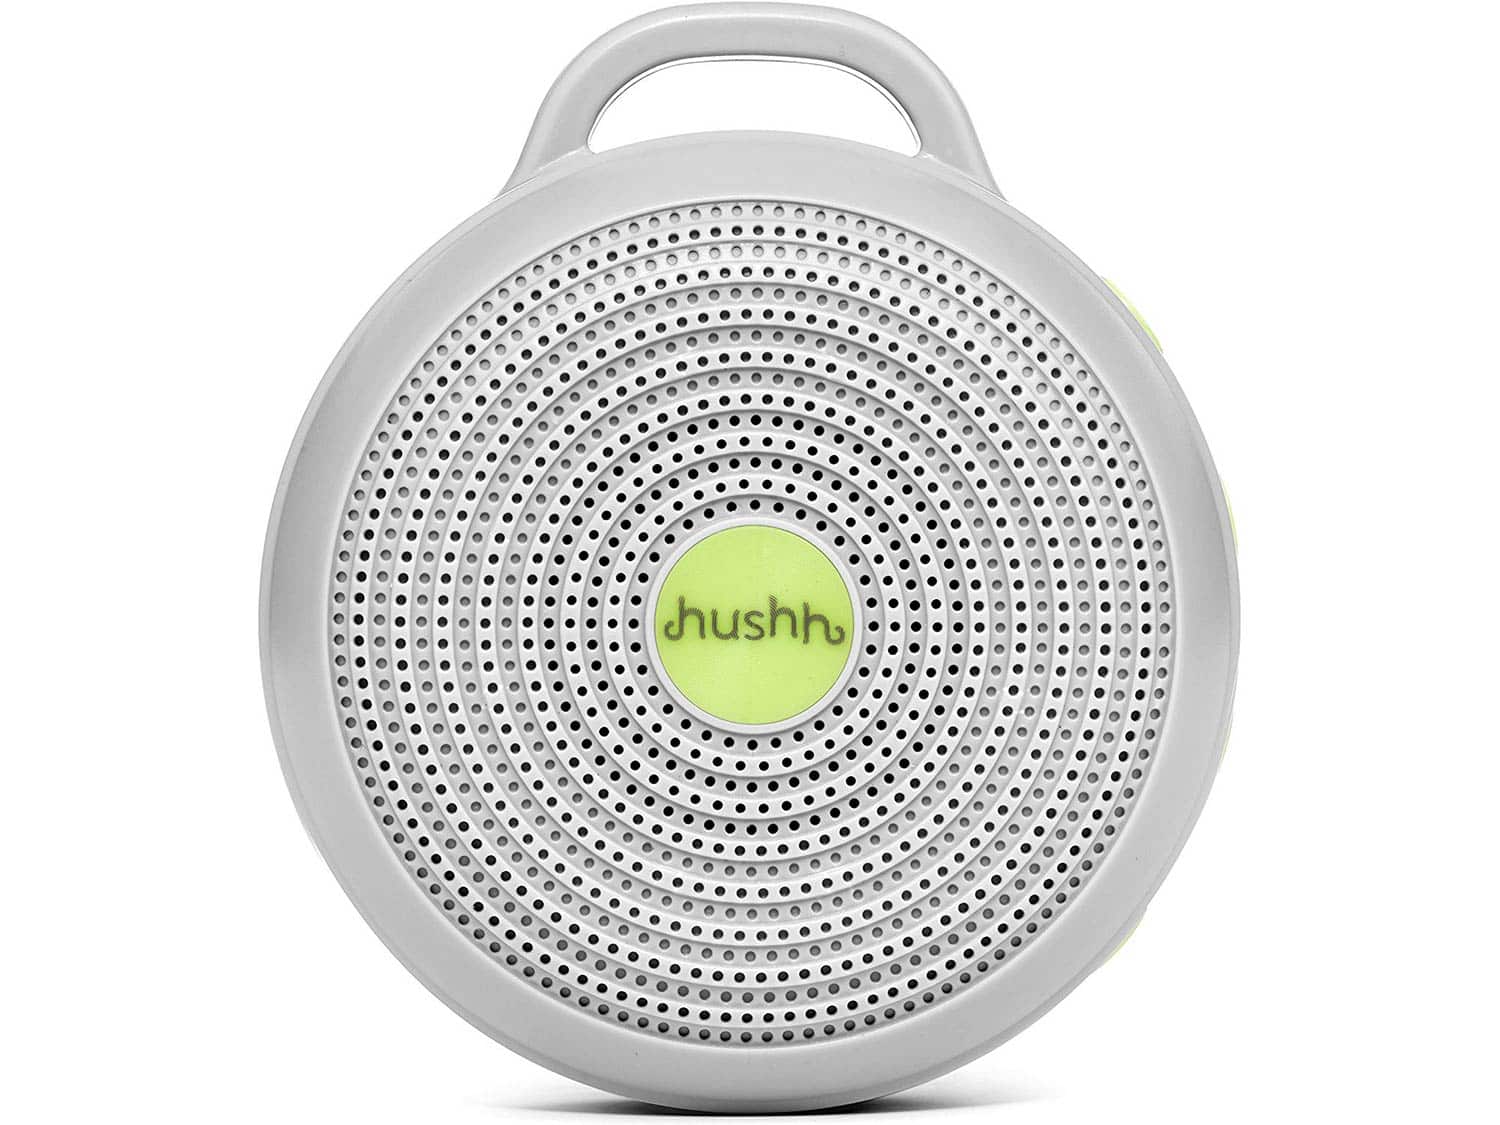 Marpac Hushh Portable White Noise Machine for Baby | 3 Soothing, Natural Sounds with Volume Control Baby-Safe Clip & Child Lock, Gray, 3.7 ounces